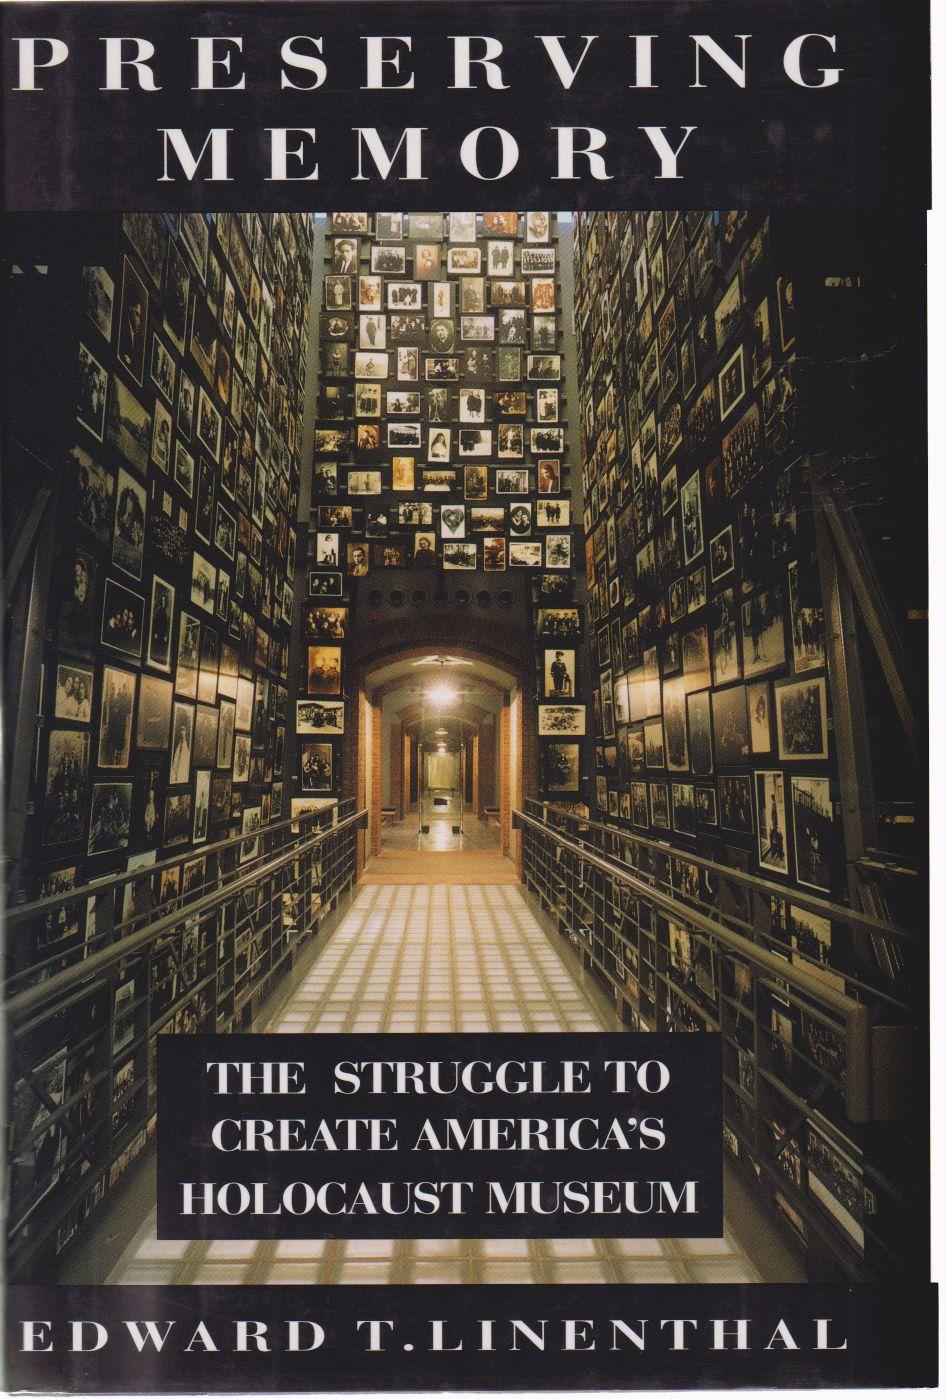 Preserving memory. The struggle to create America's Holocaust Museum. - Linenthal, Edward Tabor